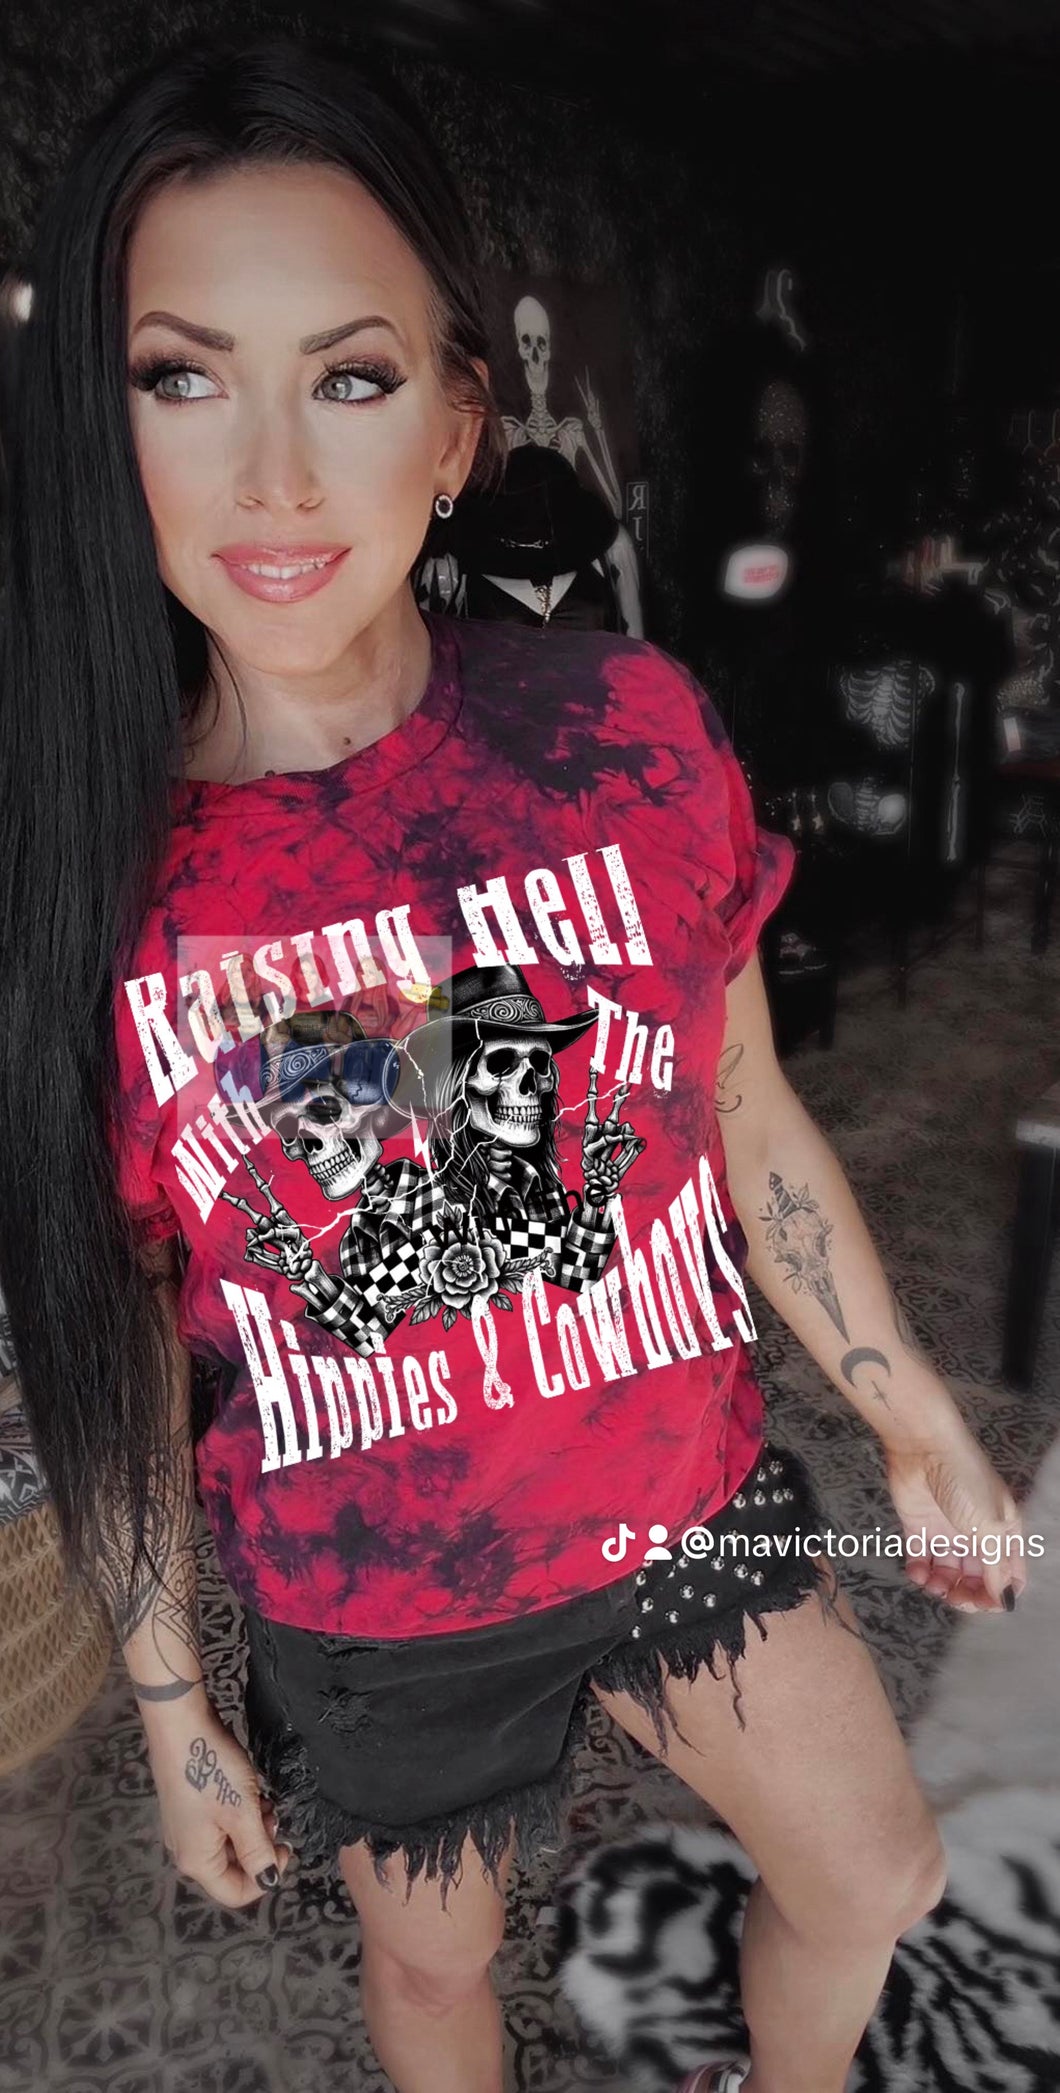 Raising Hell with the Hippies and Cowboys on red and black dyed graphic tee - Mavictoria Designs Hot Press Express